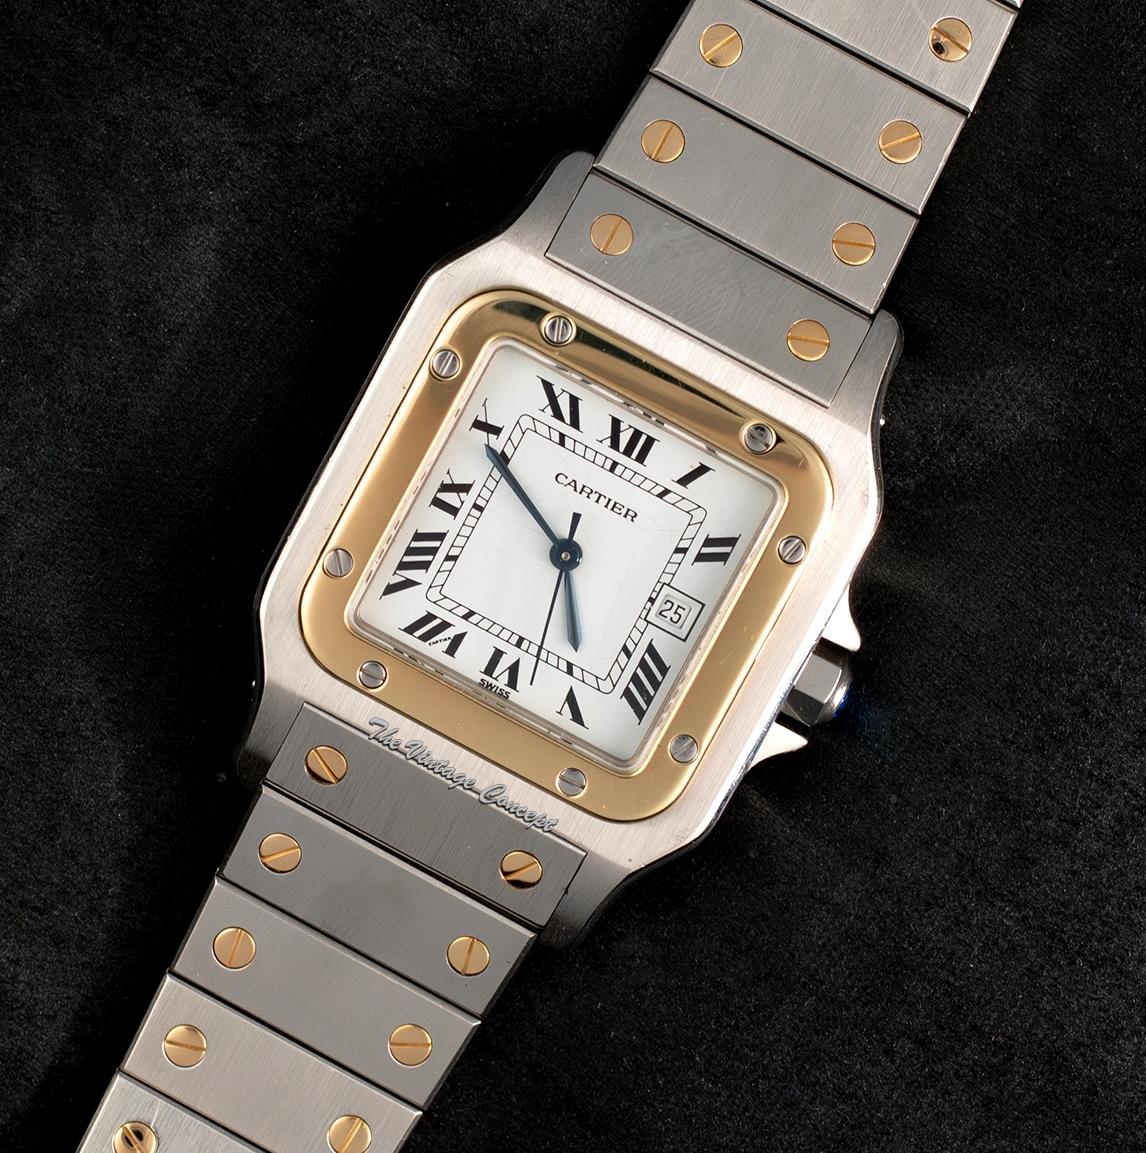 Cartier Large Two-Tone 18K Yellow Gold & Stainless Steel Santos Galbée 2961 Automatic Watch w/ Original Card (SOLD)